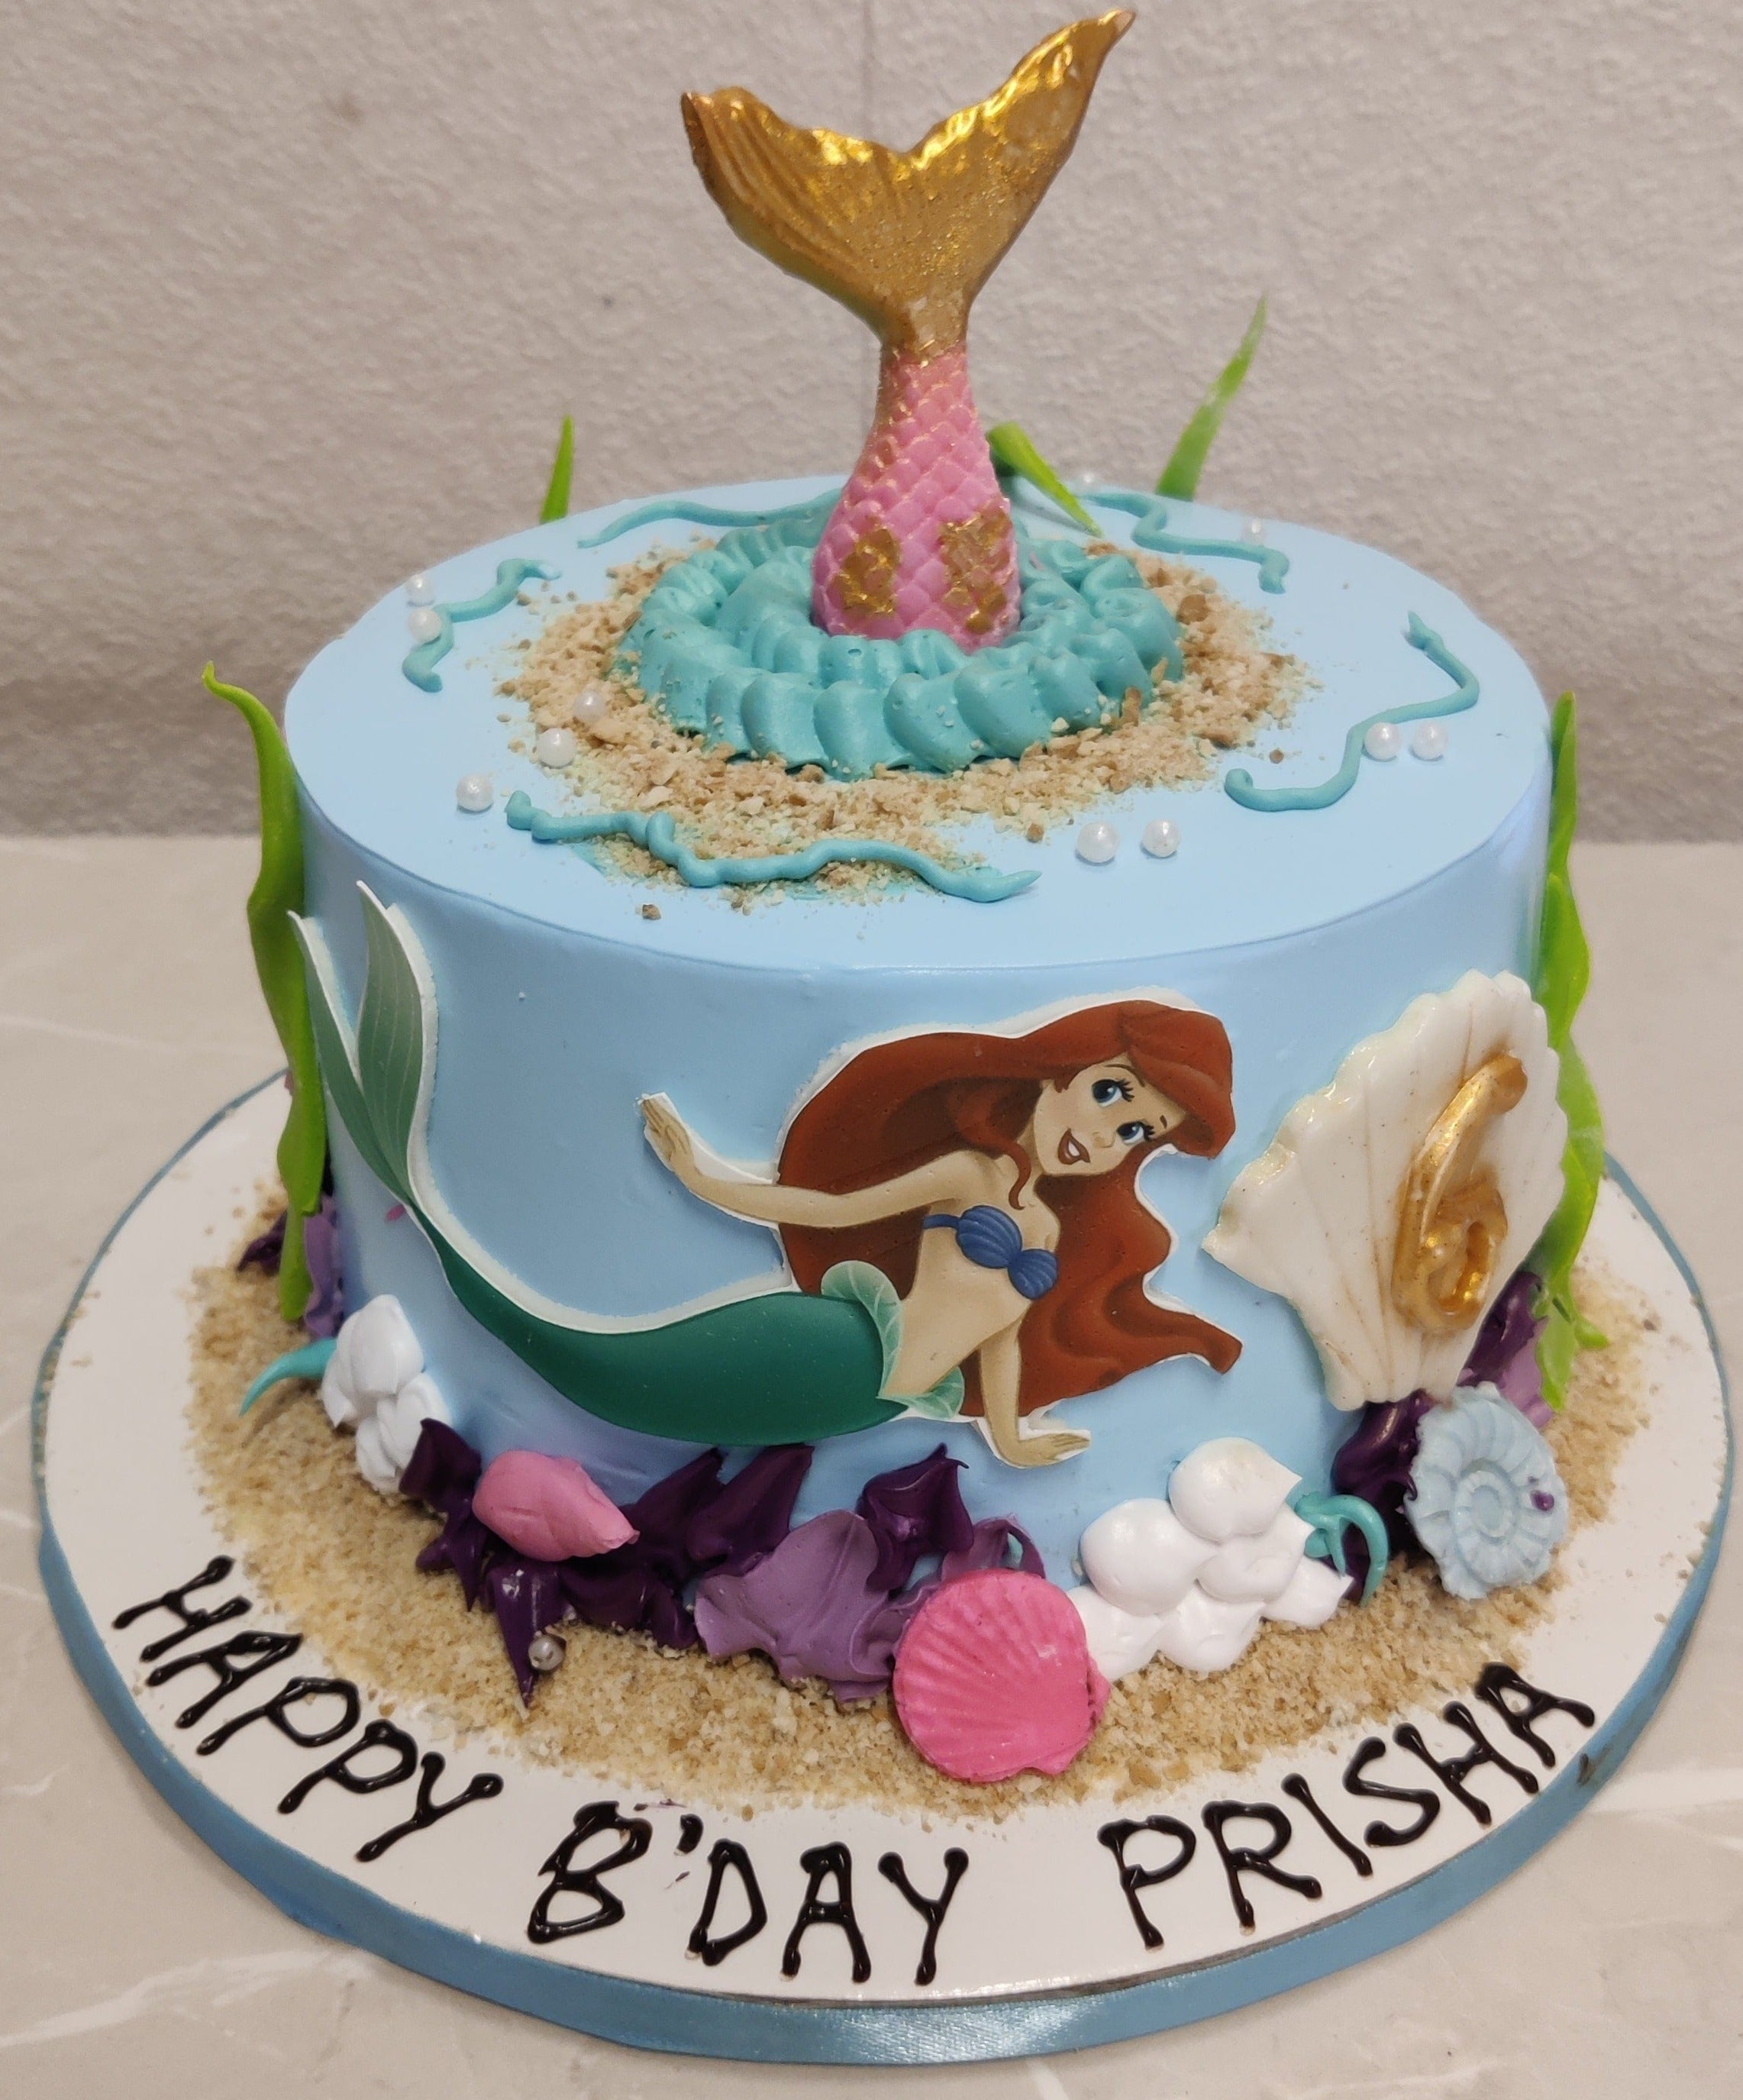 A family member's birthday cake from an Abba song Dancing queen : r/mammamia